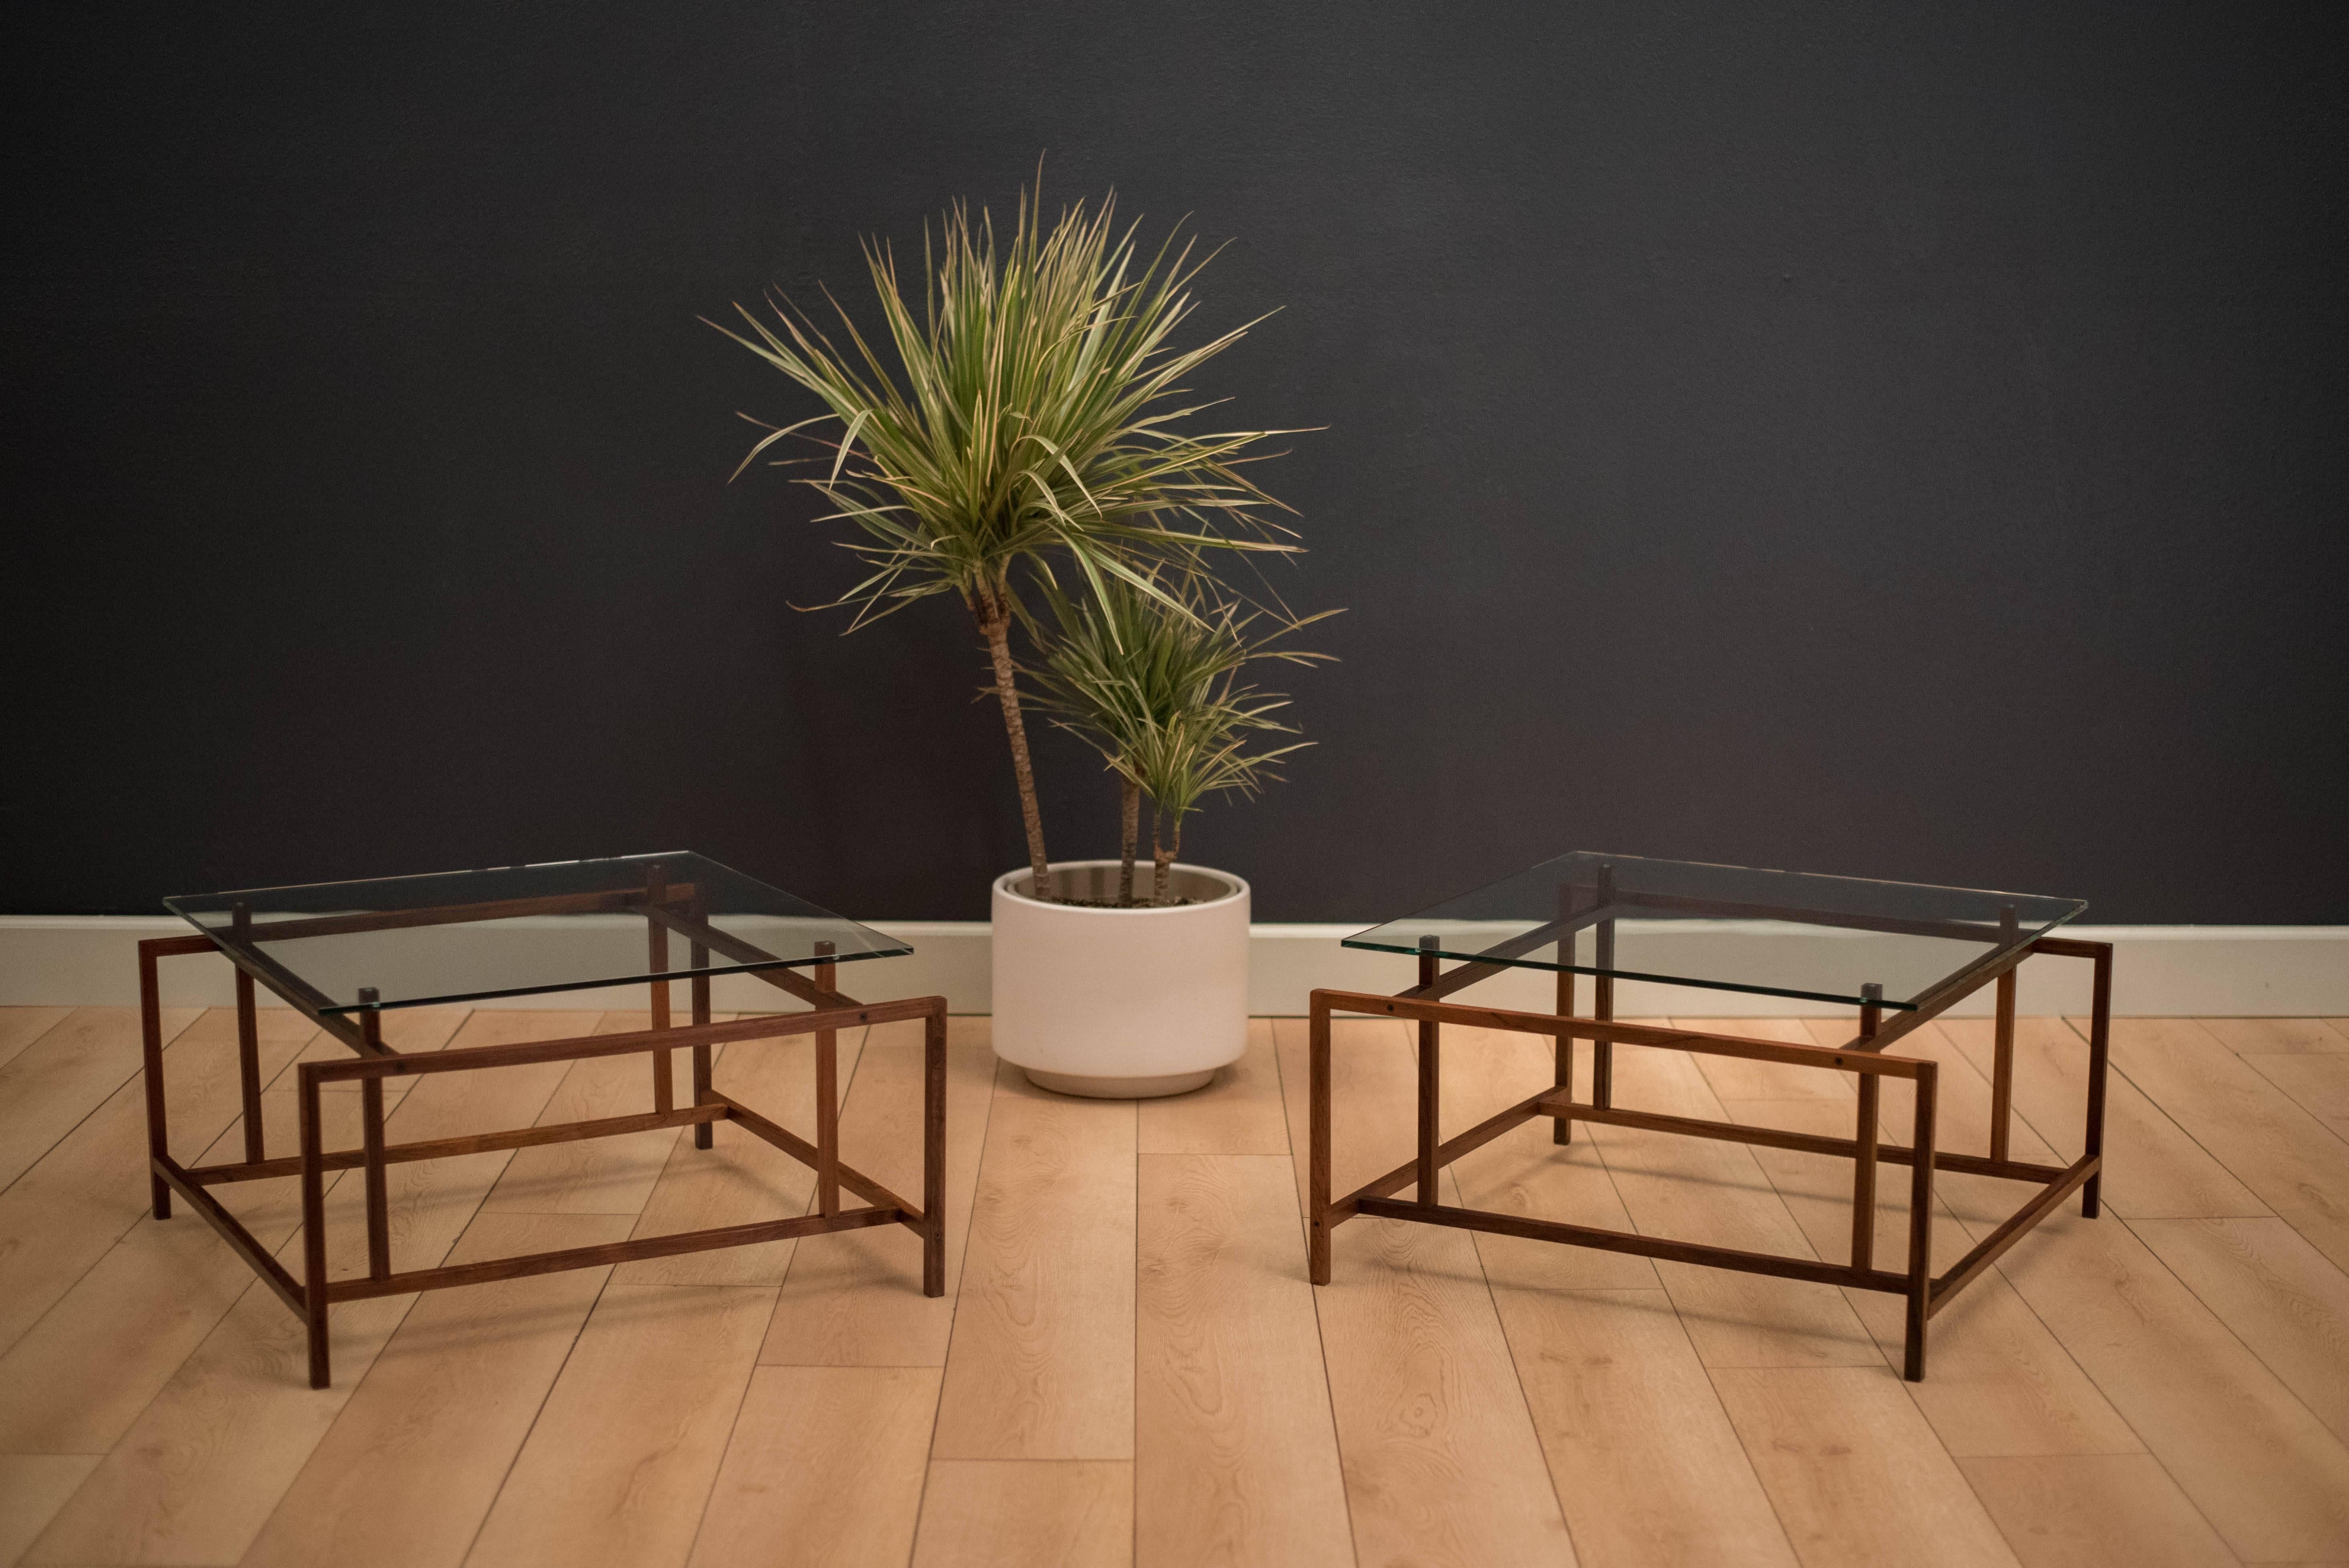 Mid Century glass side tables designed by Henning Norgaard for Komfort. These unique floating tables display a geometric design with rosewood bases. Price is for the pair. 

Glass top is 3/8